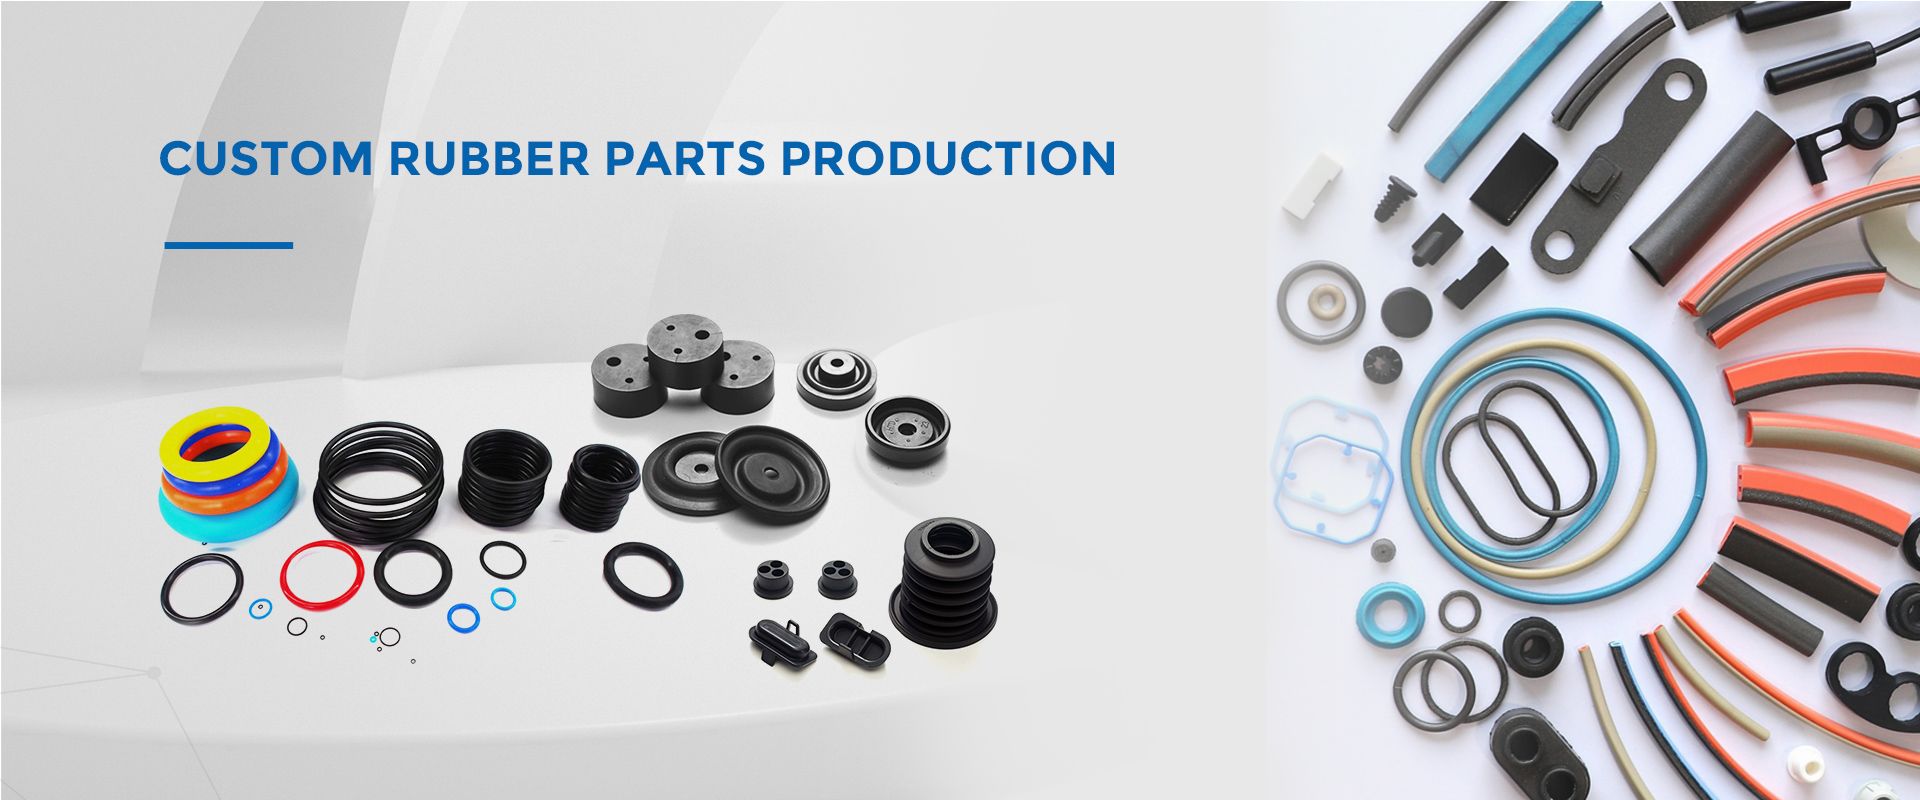 Custome Rubber Parts Production